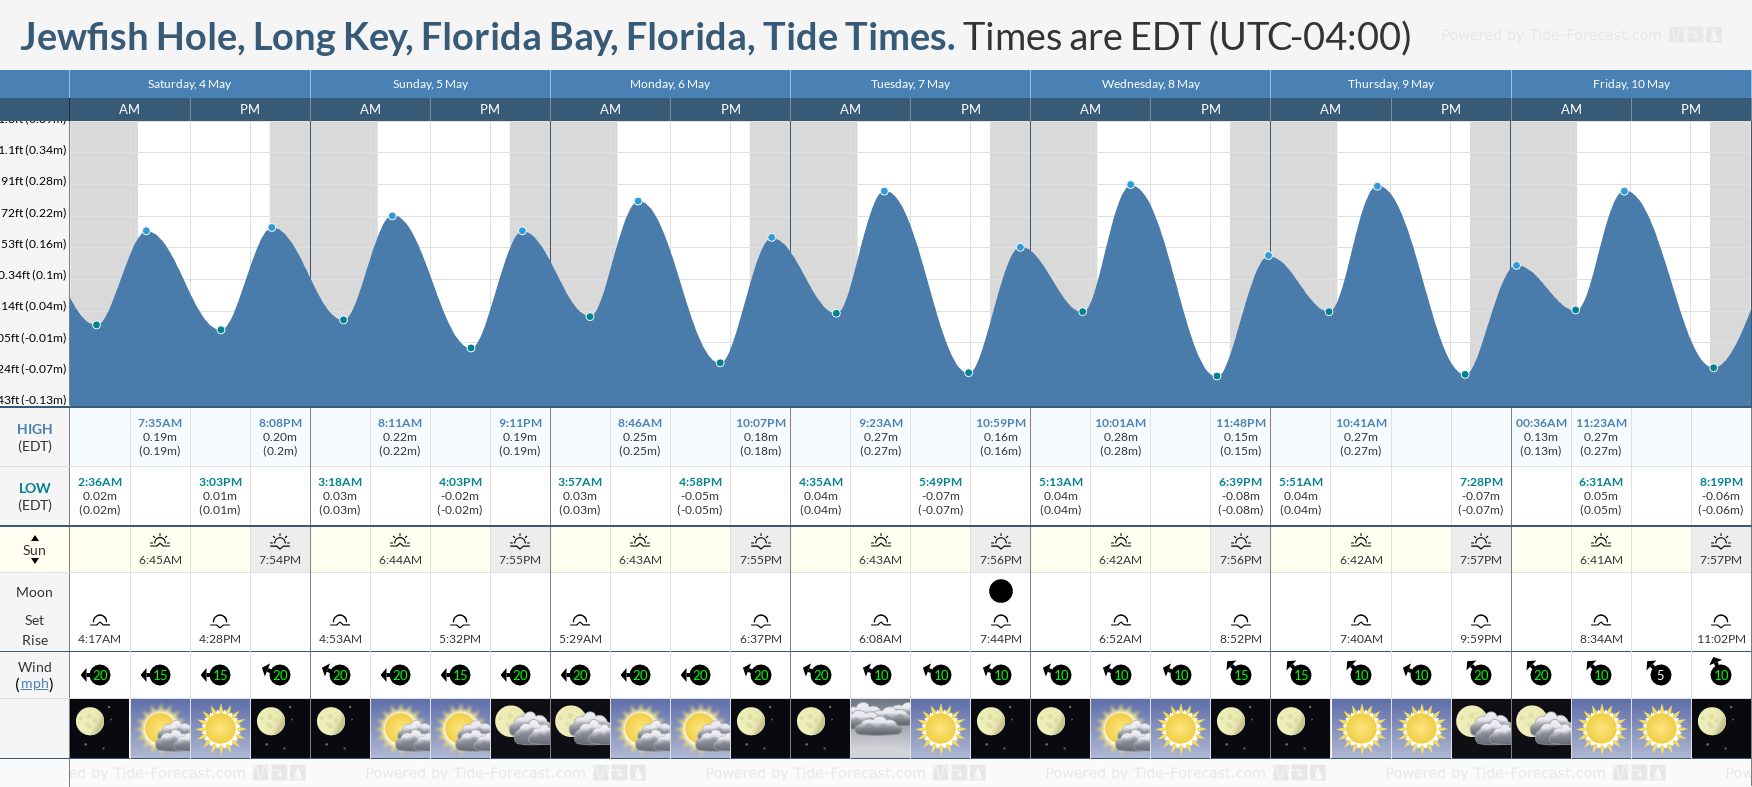 Jewfish Hole, Long Key, Florida Bay, Florida Tide Chart including high and low tide times for the next 7 days